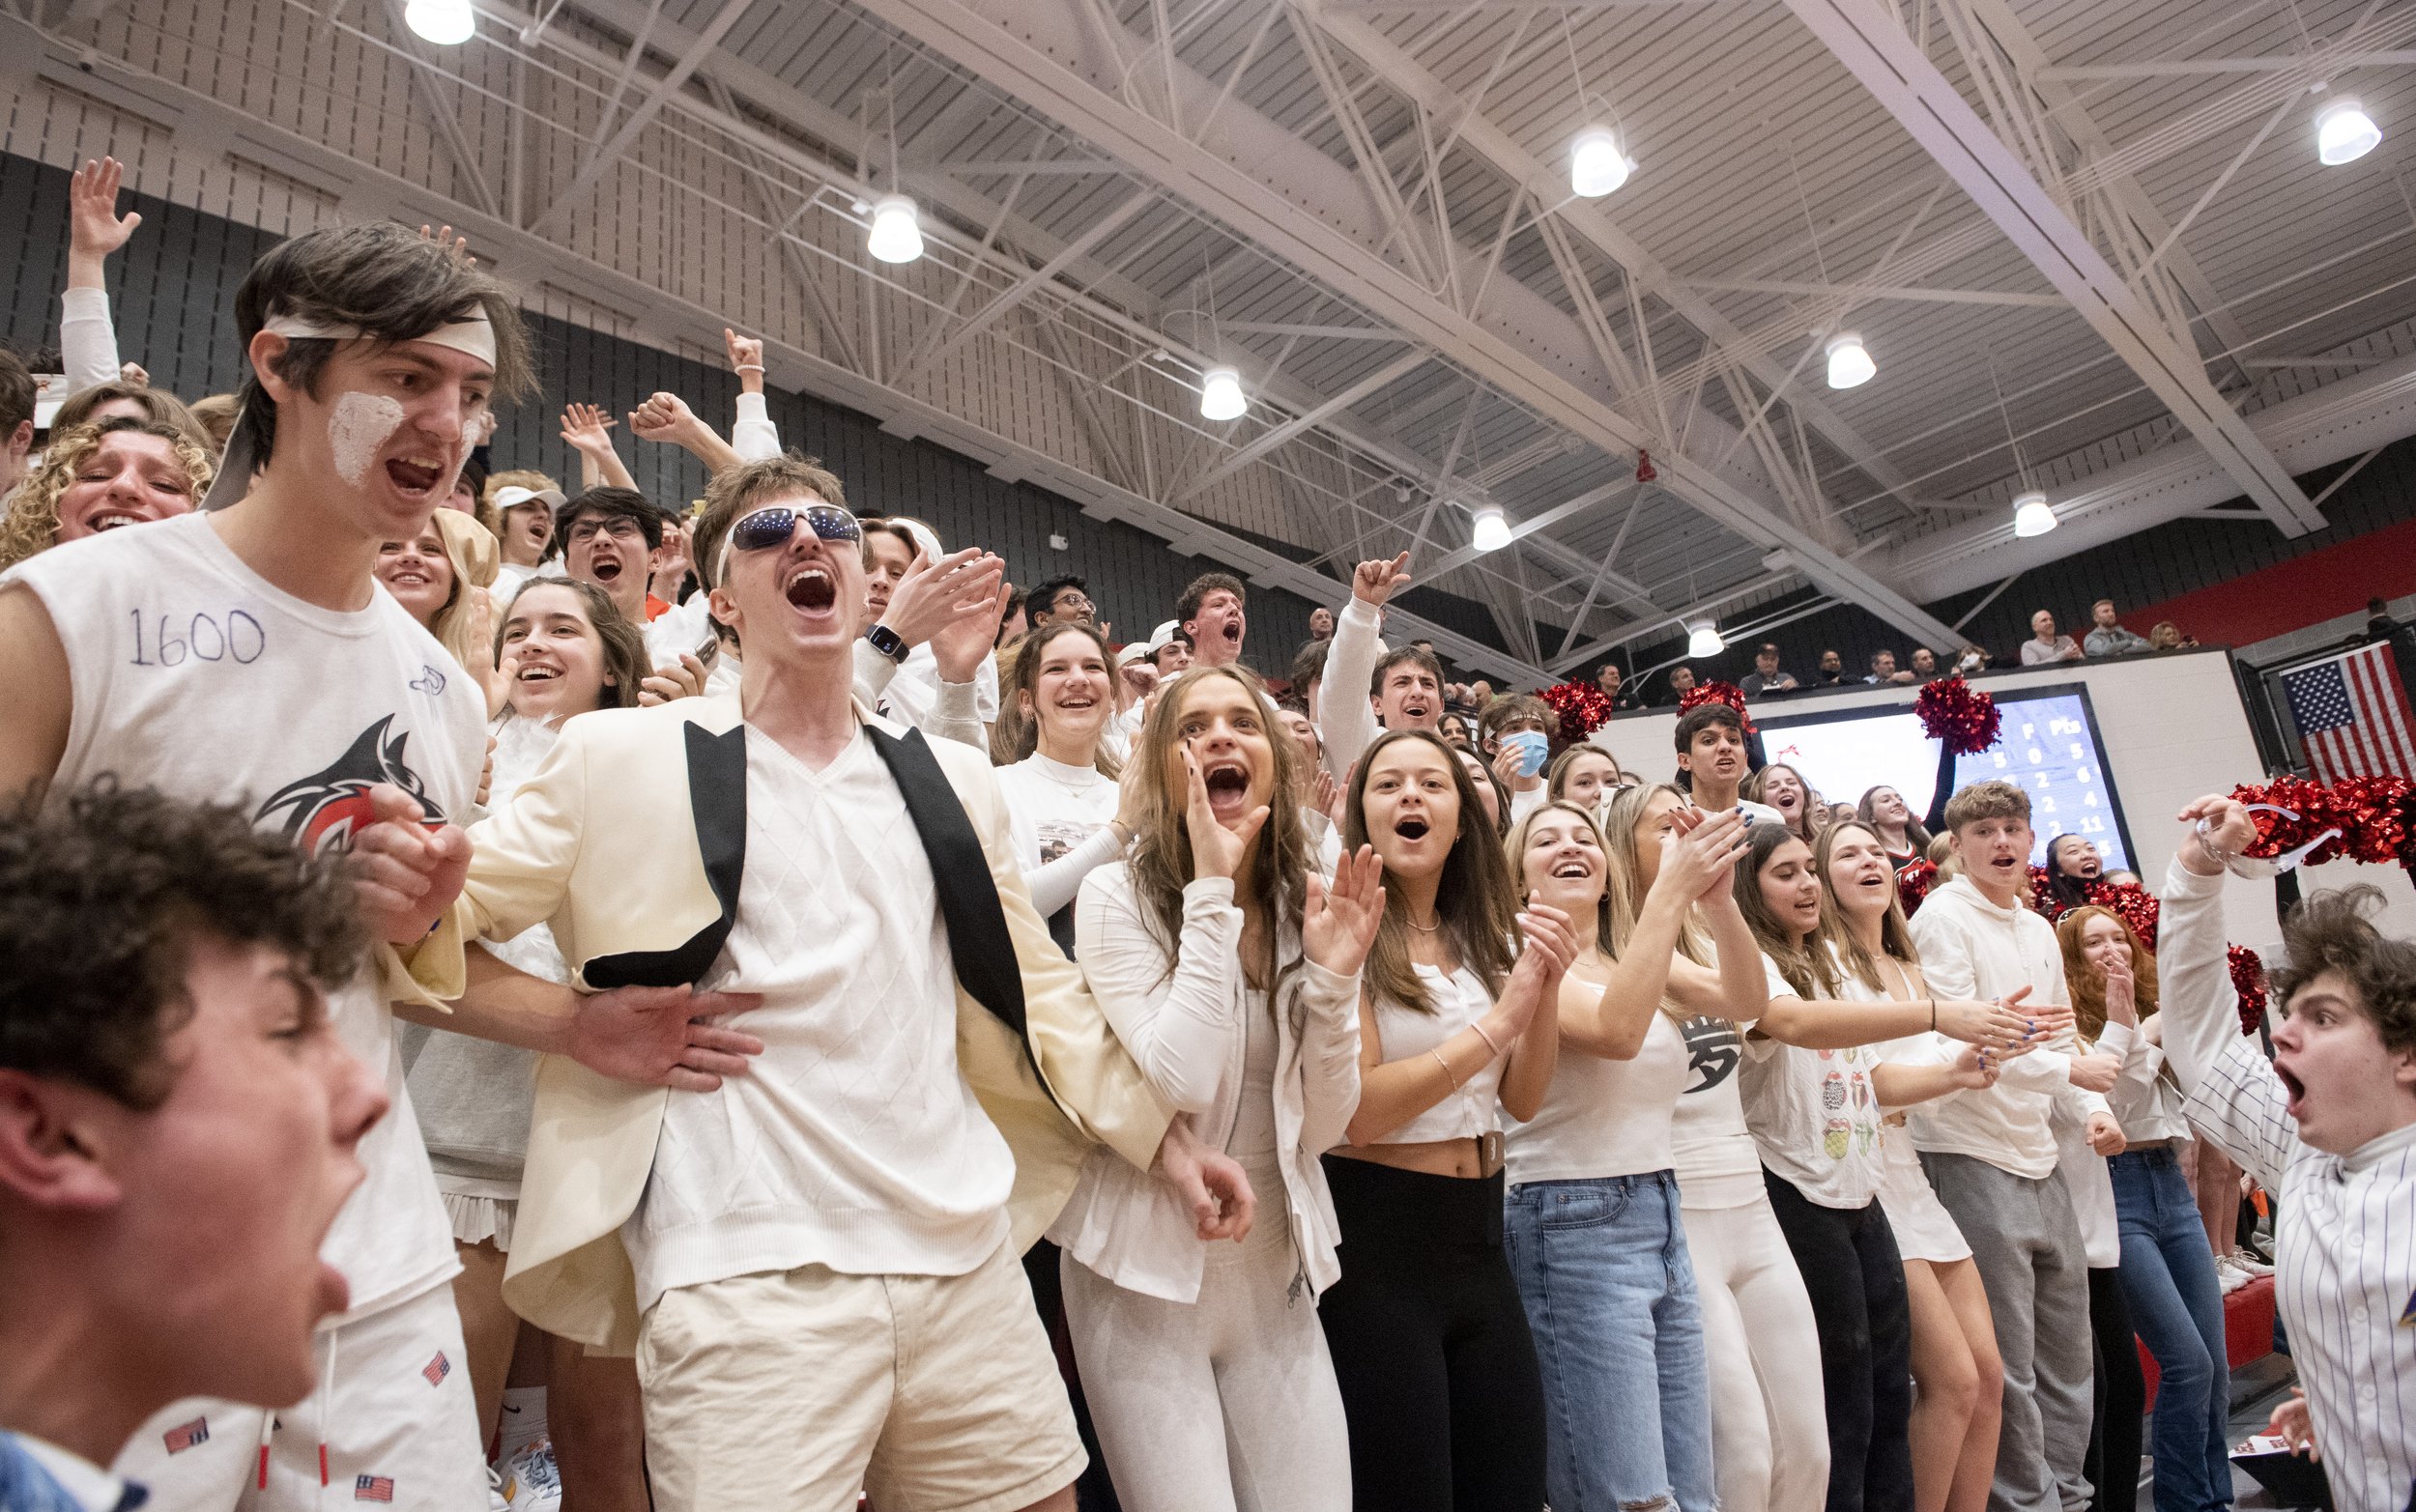  Fox Chapel High School’s student section celebrates their boys basketball team’s 37-32 victory against Central Catholic High School on Tuesday, March 1, 2022, at Peters Township High School. (Emily Matthews/Post-Gazette)  